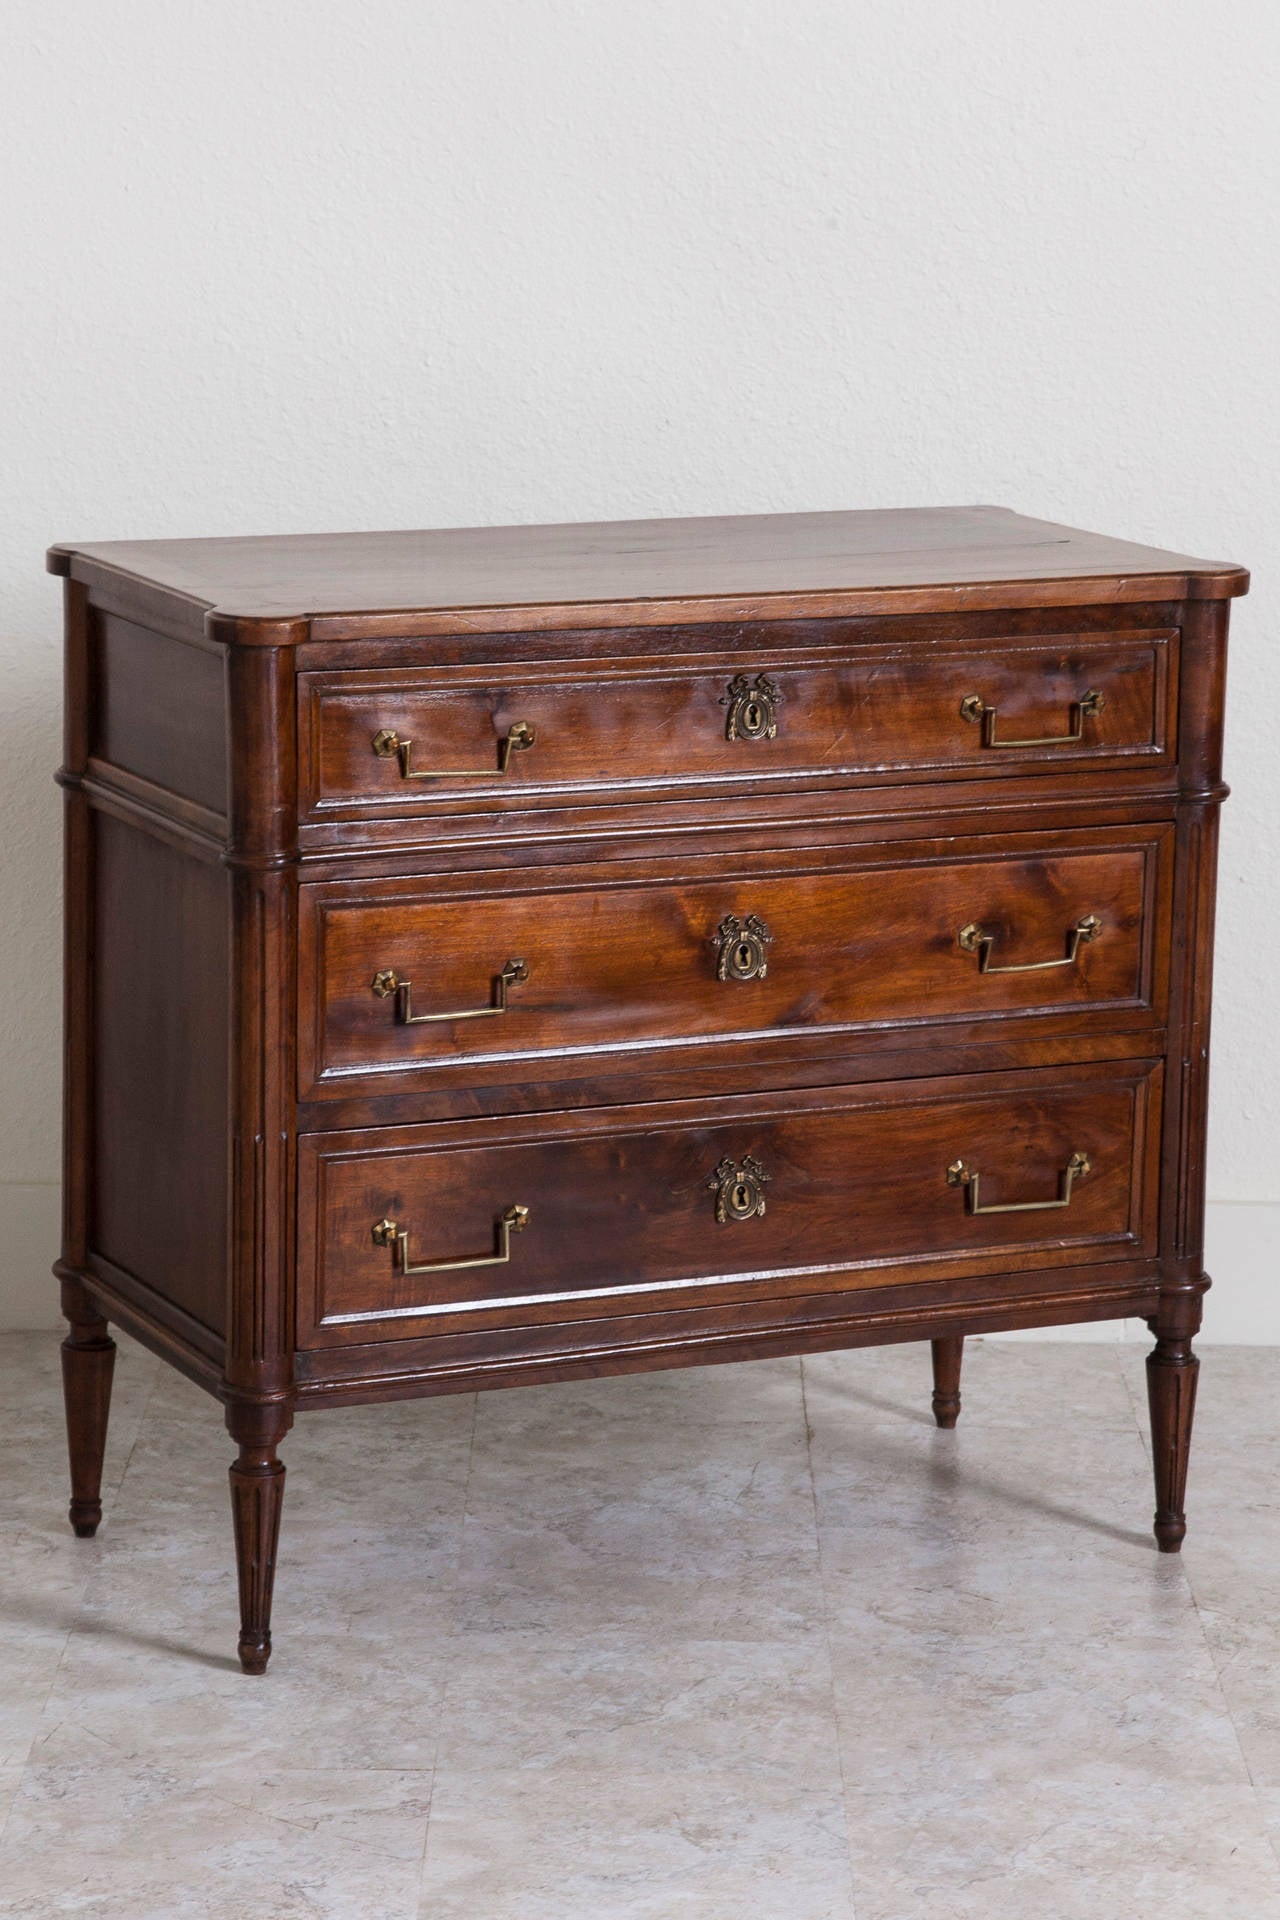 This 19th century Louis XVI style commode or chest of drawers is made of solid French walnut and features three drawers with original bronze hardware. Its fluted sides extend to tapered hand-turned legs. Created in the 1880s and used in a Paris